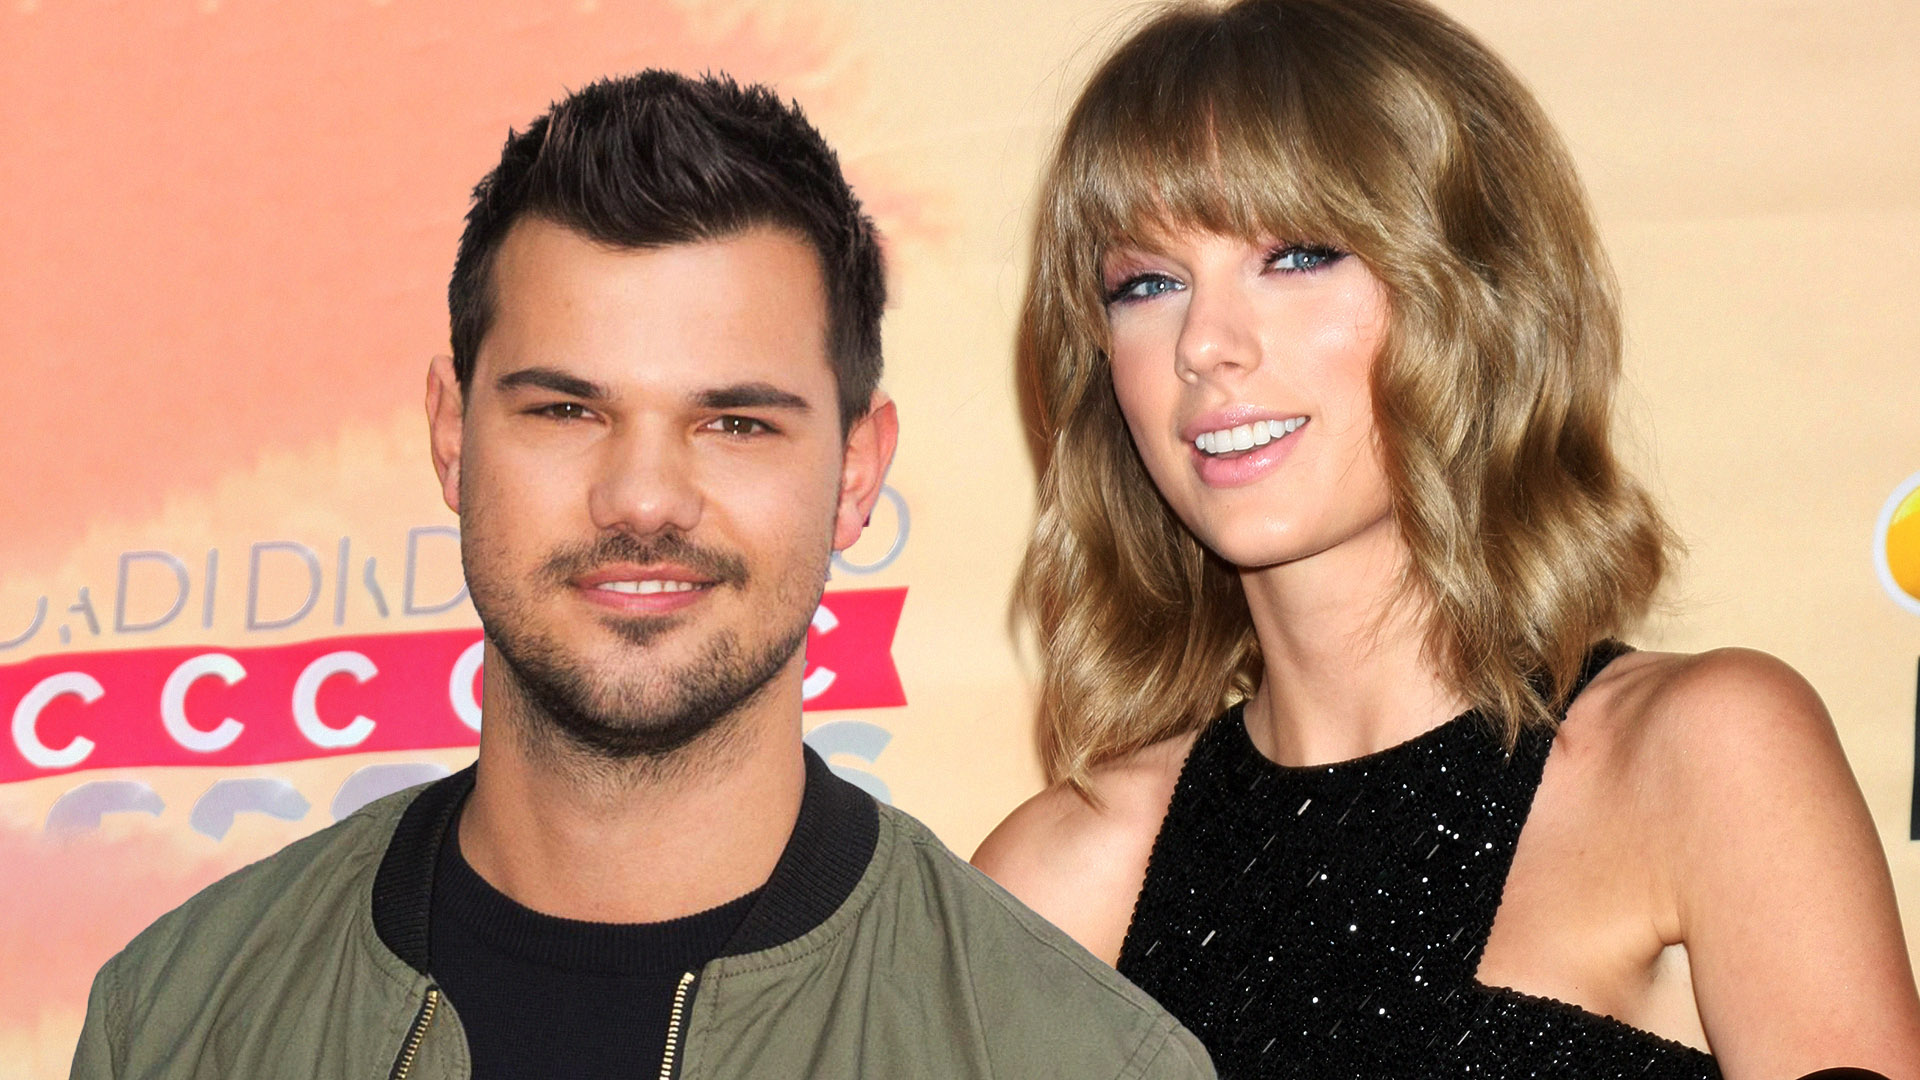 Taylor Lautner's Eras Tour Appearance Going Viral for the Sweetest Reason